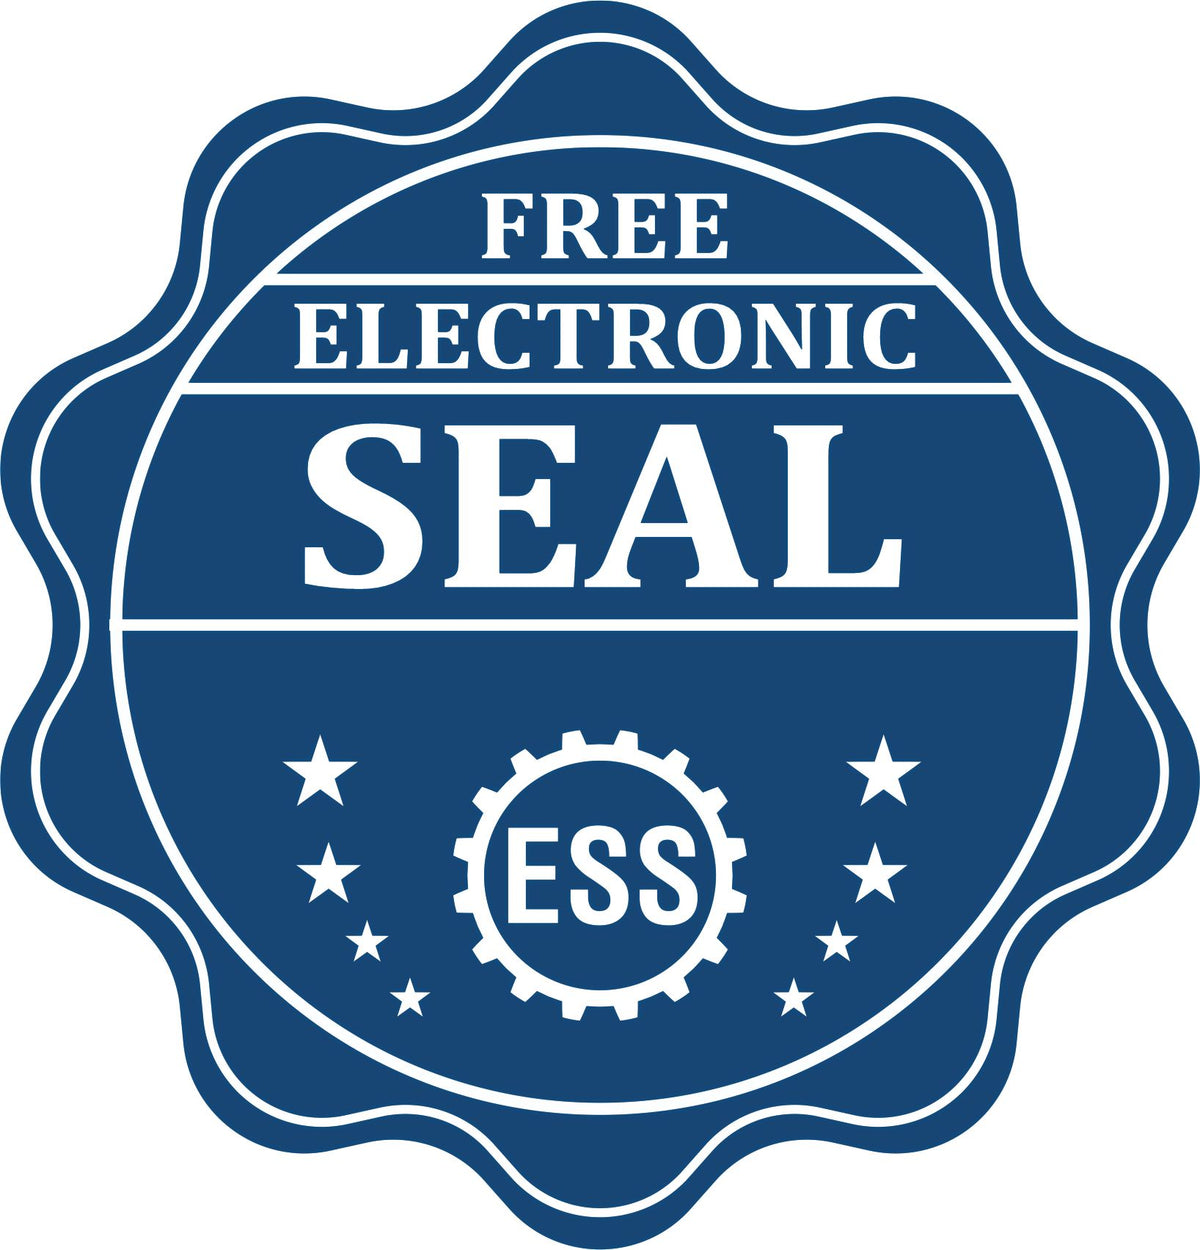 A badge showing a free electronic seal for the Iowa Desk Surveyor Seal Embosser with stars and the ESS gear on the emblem.